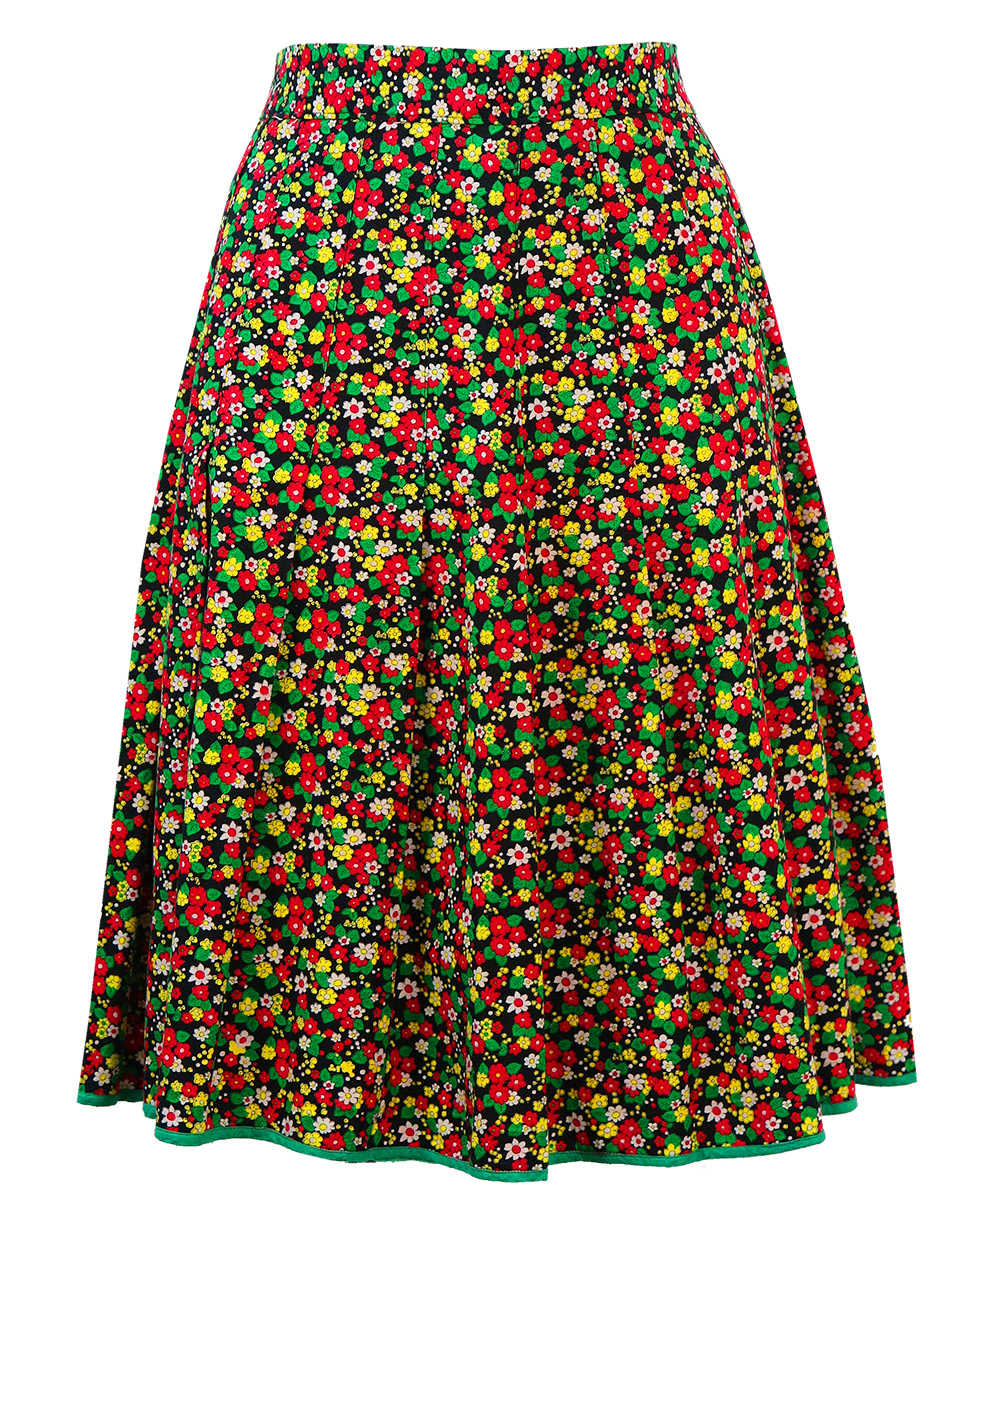 Red, Green & Yellow Ditsy Floral Print Knee Length Skirt - S/M | Reign ...